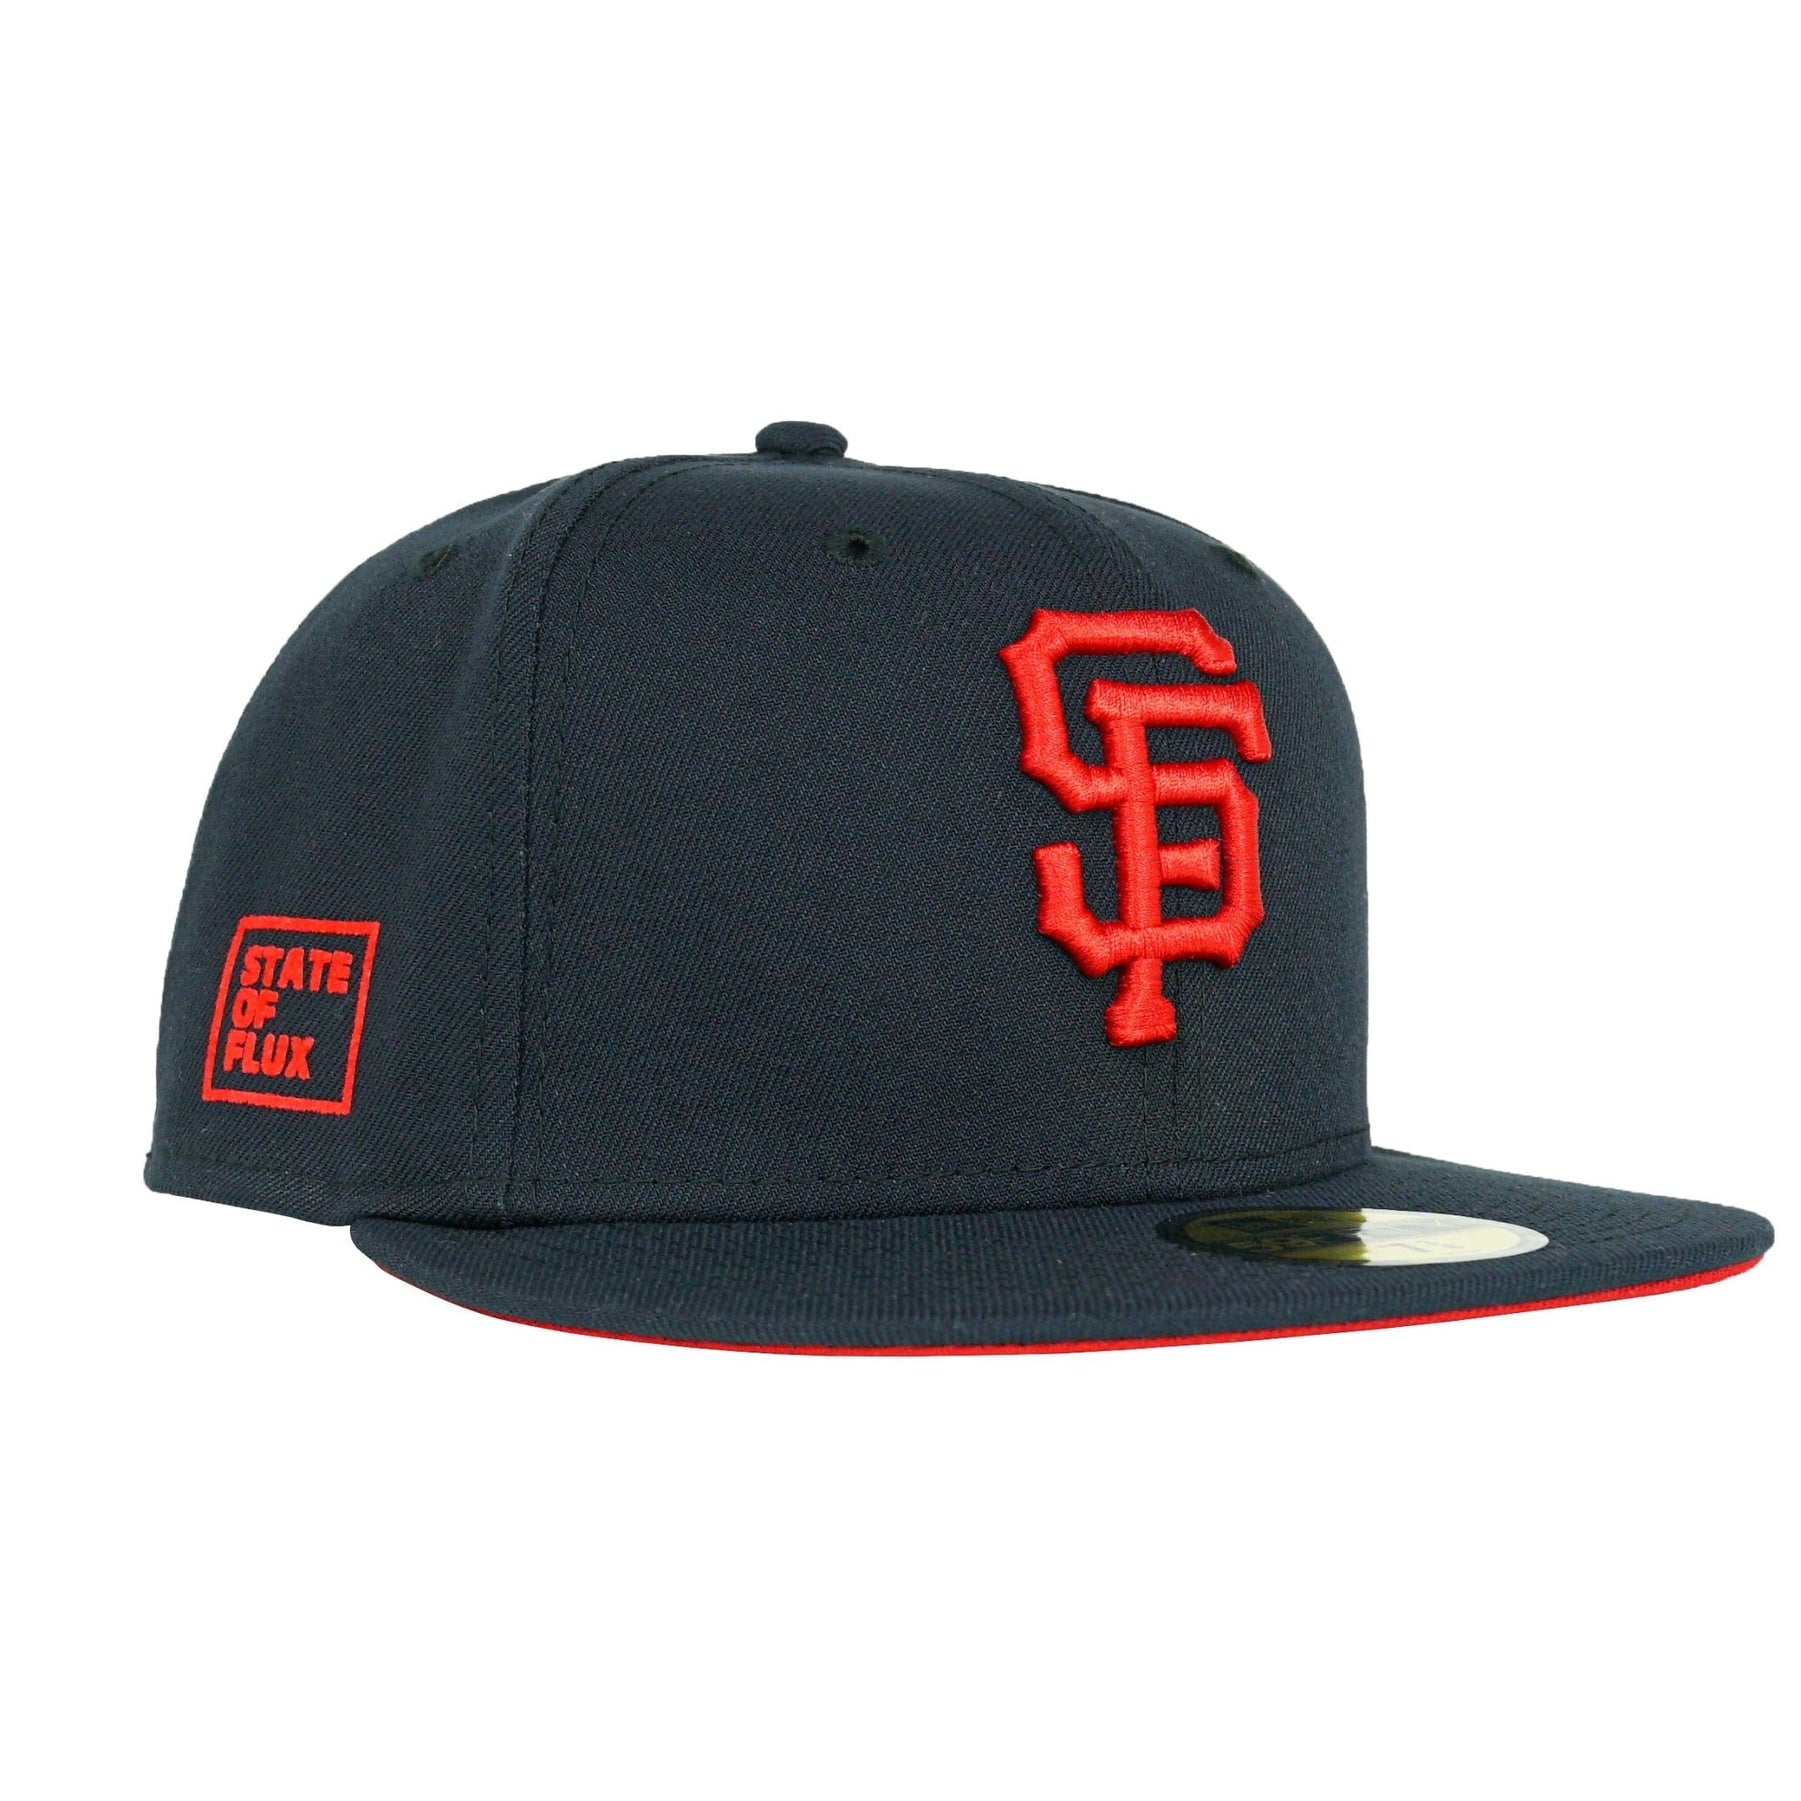 State Of Flux X New Era San Francisco Giants 59Fifty Fitted Hat in navy and radiant red